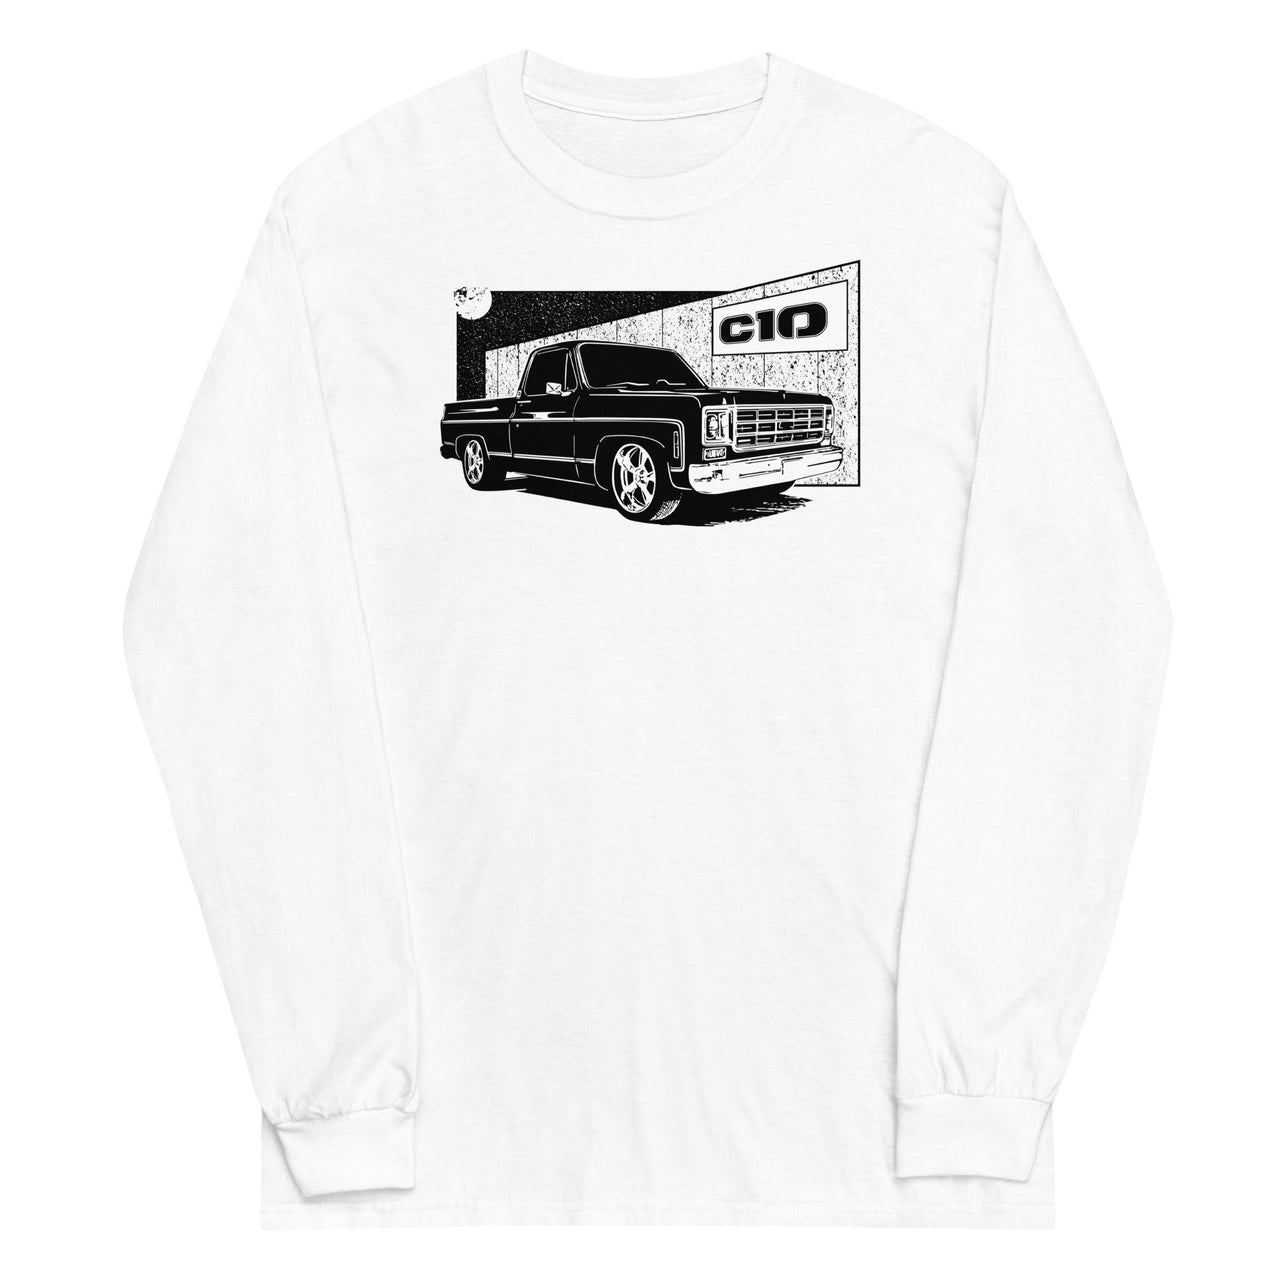 77 Square Body C10 Long Sleeve T-Shirt in white